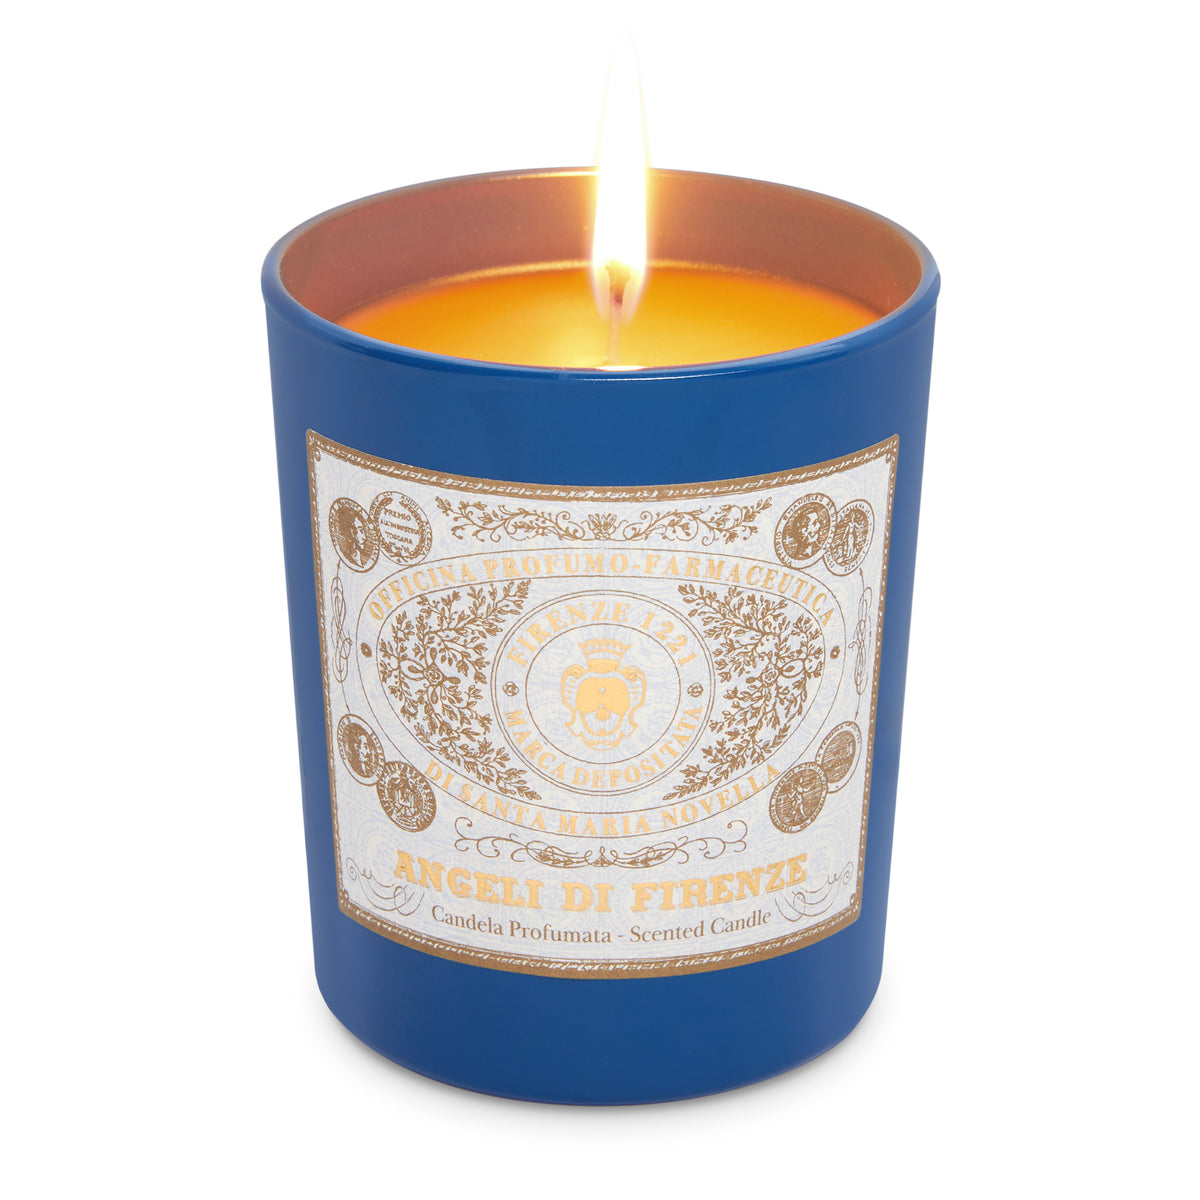 Primary Image of Angeli Di Firenze Scented Candle